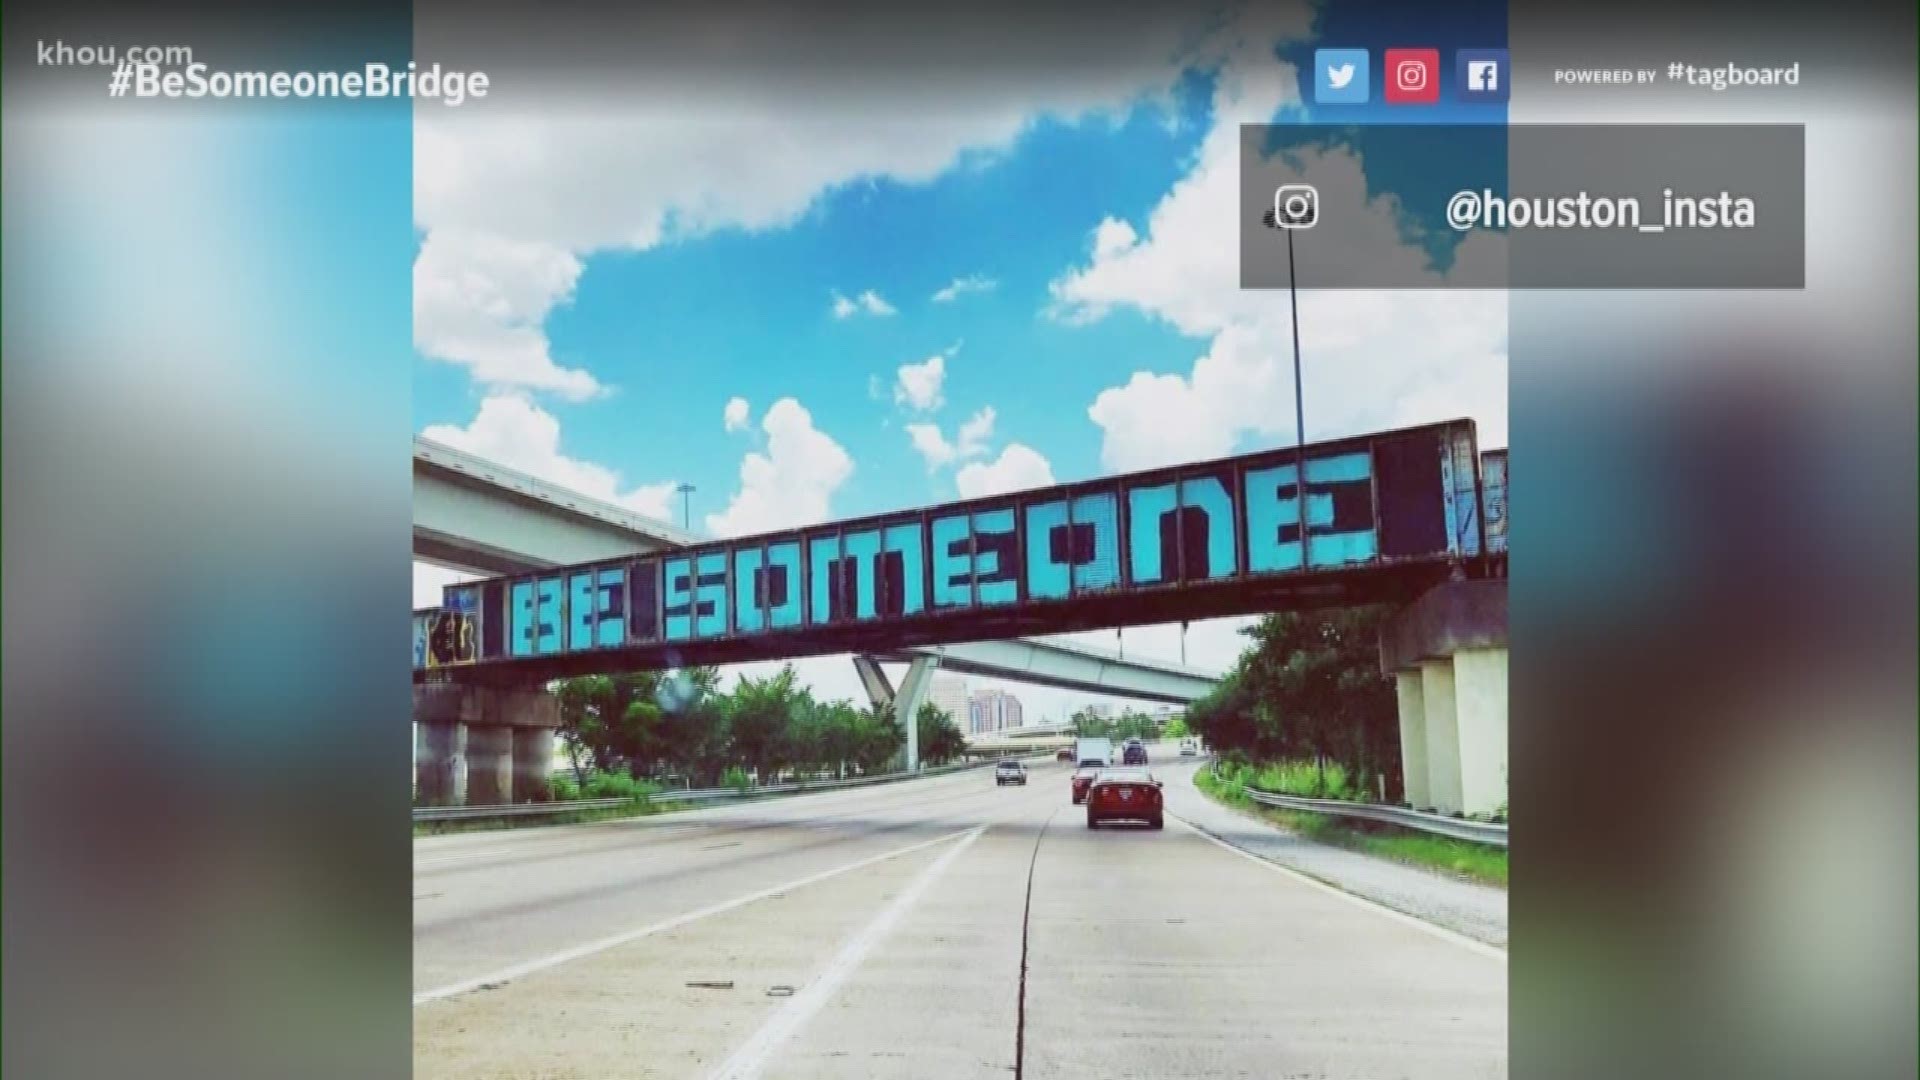 The famous "Be Someone" train bridge over I-45 near downtown has apparently been vandalized once again. This time the teal lettering isn't just altered - it's completely wiped out with black paint.